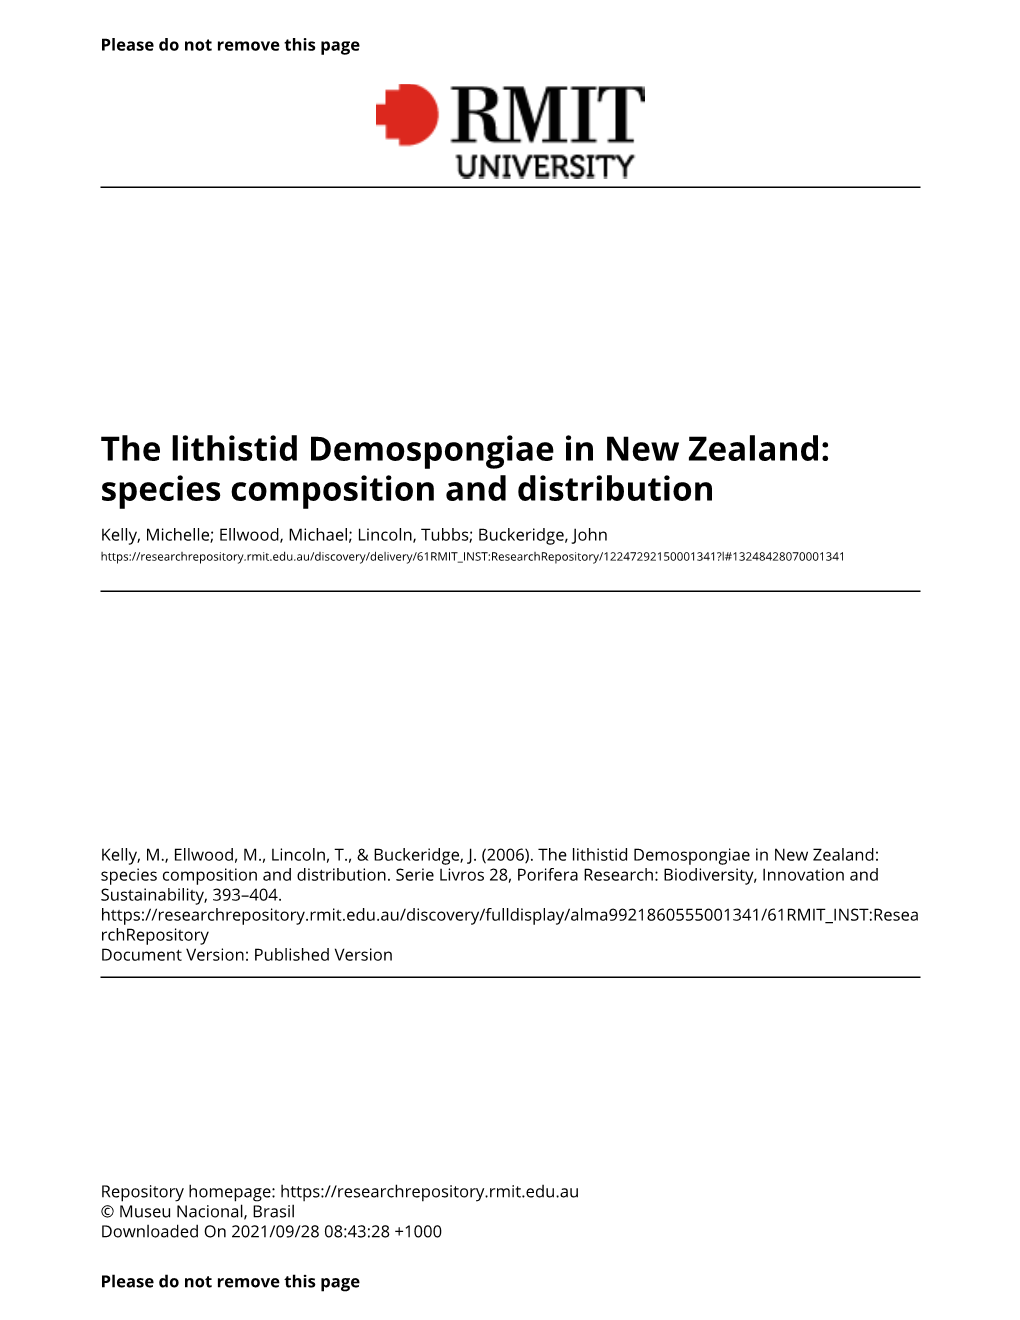 The Lithistid Demospongiae in New Zealand: Species Composition and Distribution